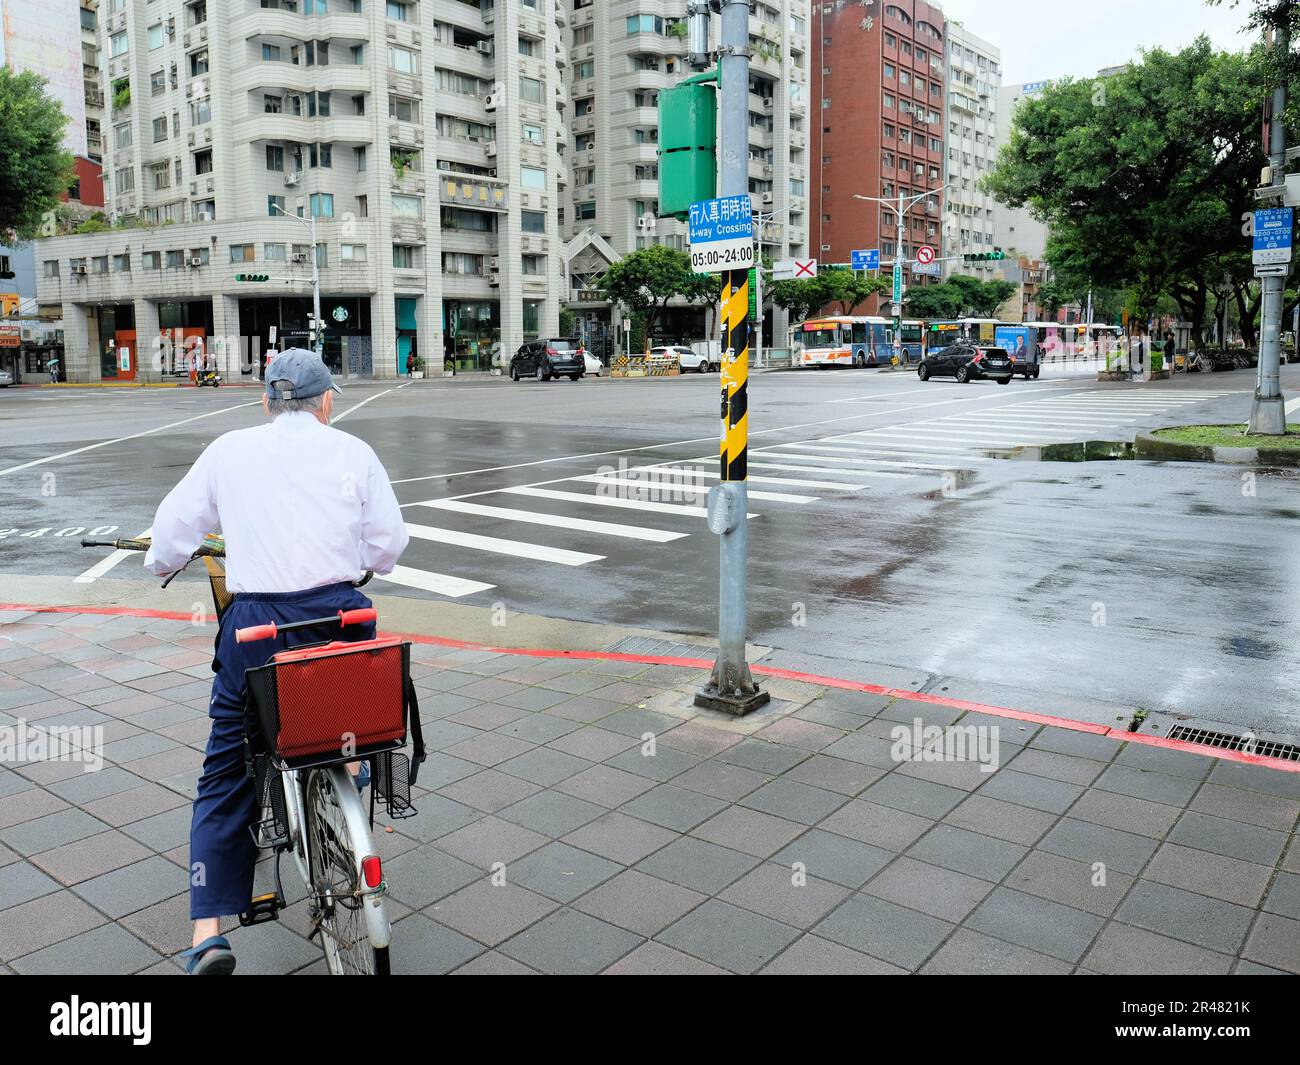 Bicycle rider stopped at a traffic light with a four way crossing sign on metal pole; buses, cars, and motor scooters, Da'an District, Taipei, Taiwan. Stock Photo